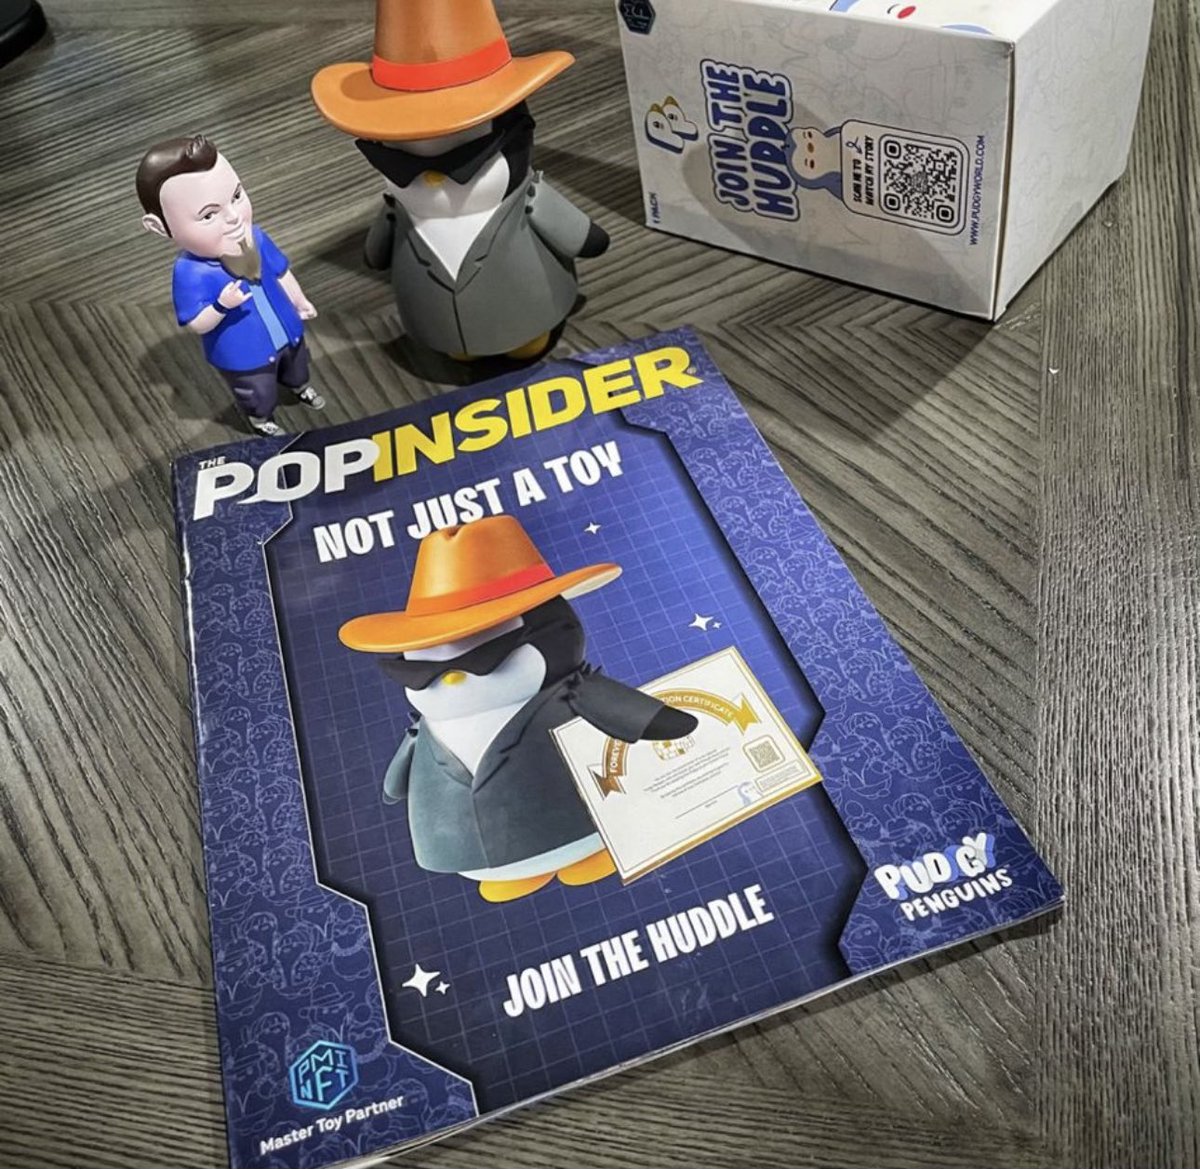 Pudgy Toys on the cover of POP INSIDER magazine. 

The Pudgy Penguins are coming.